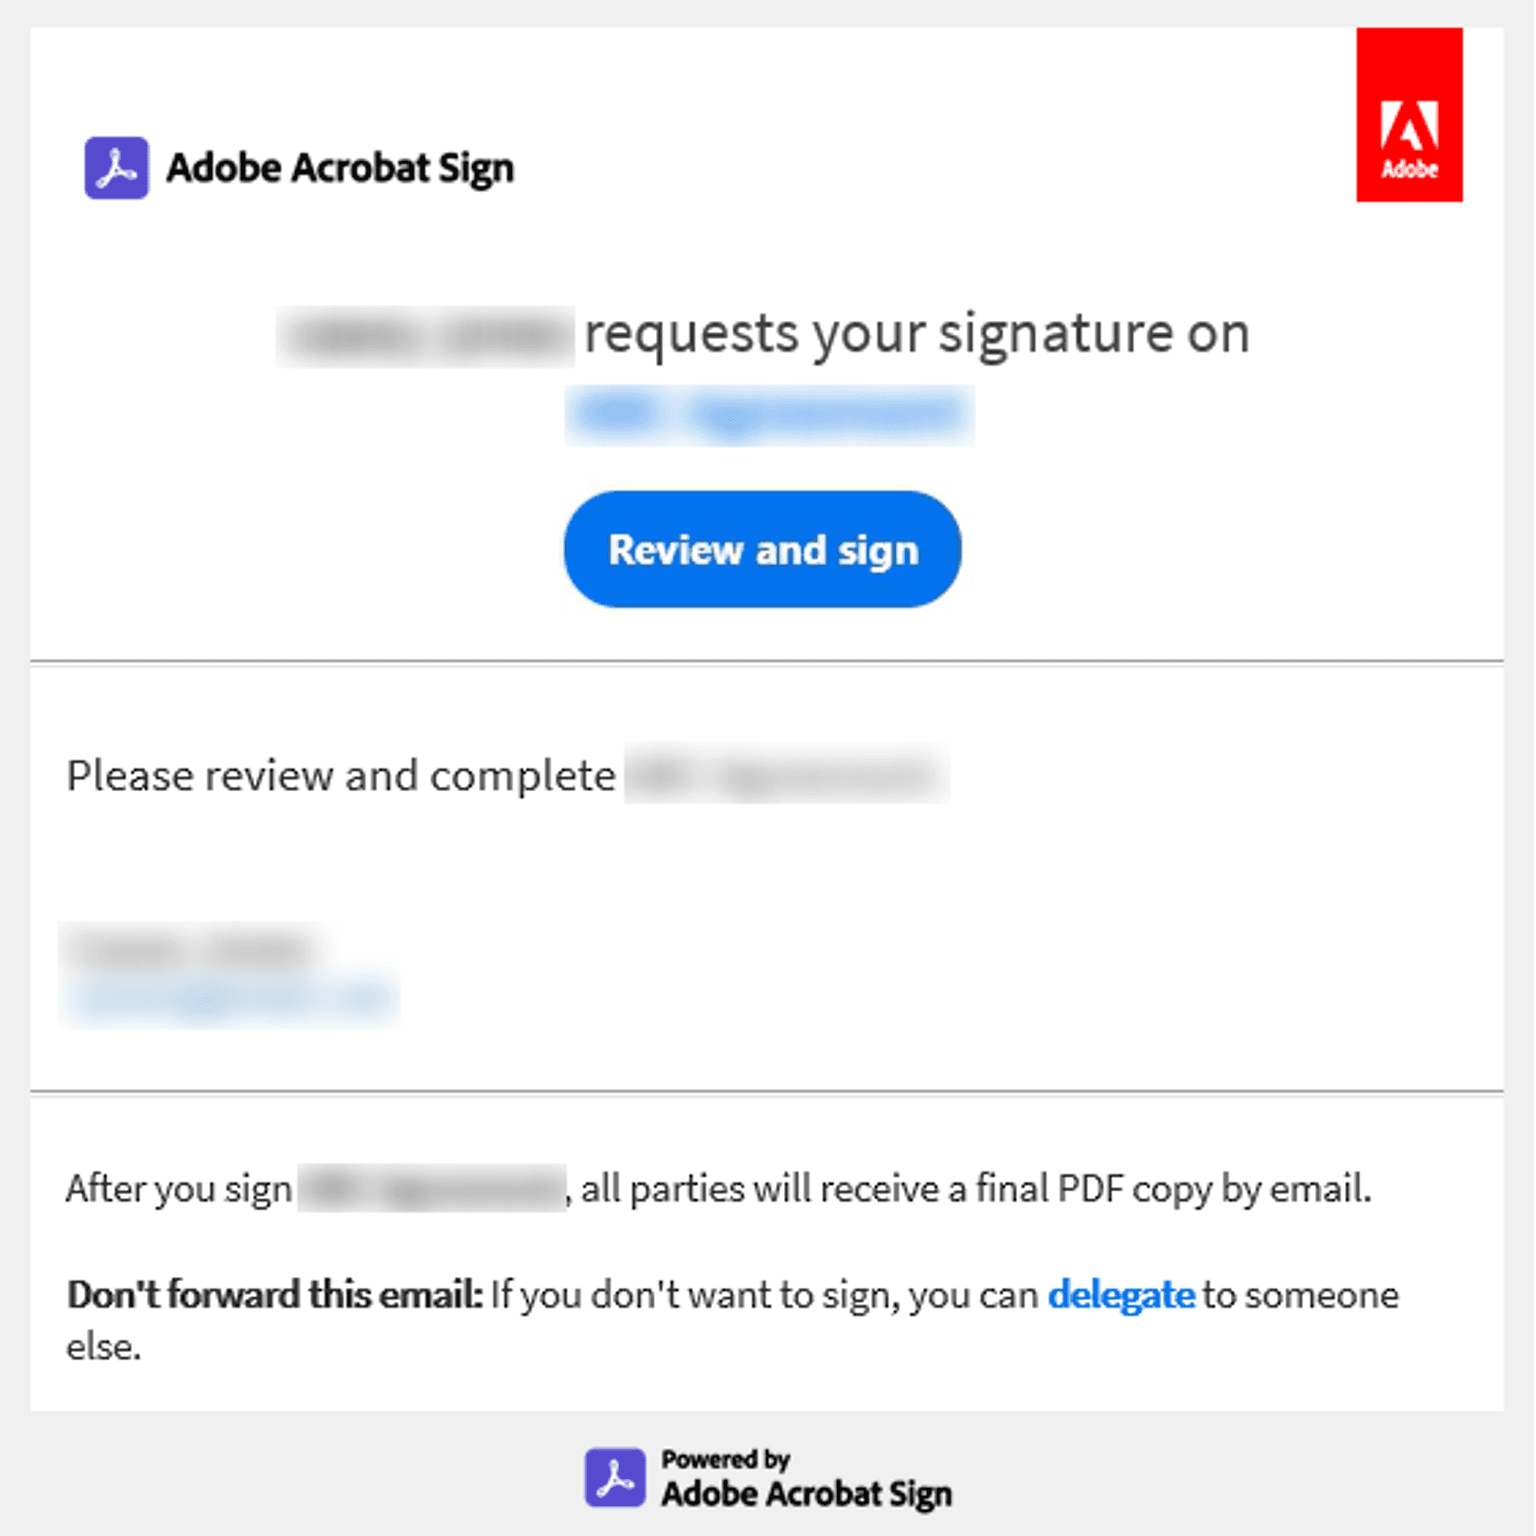 Adobe Acrobat Sign Impersonation Attack Real Email